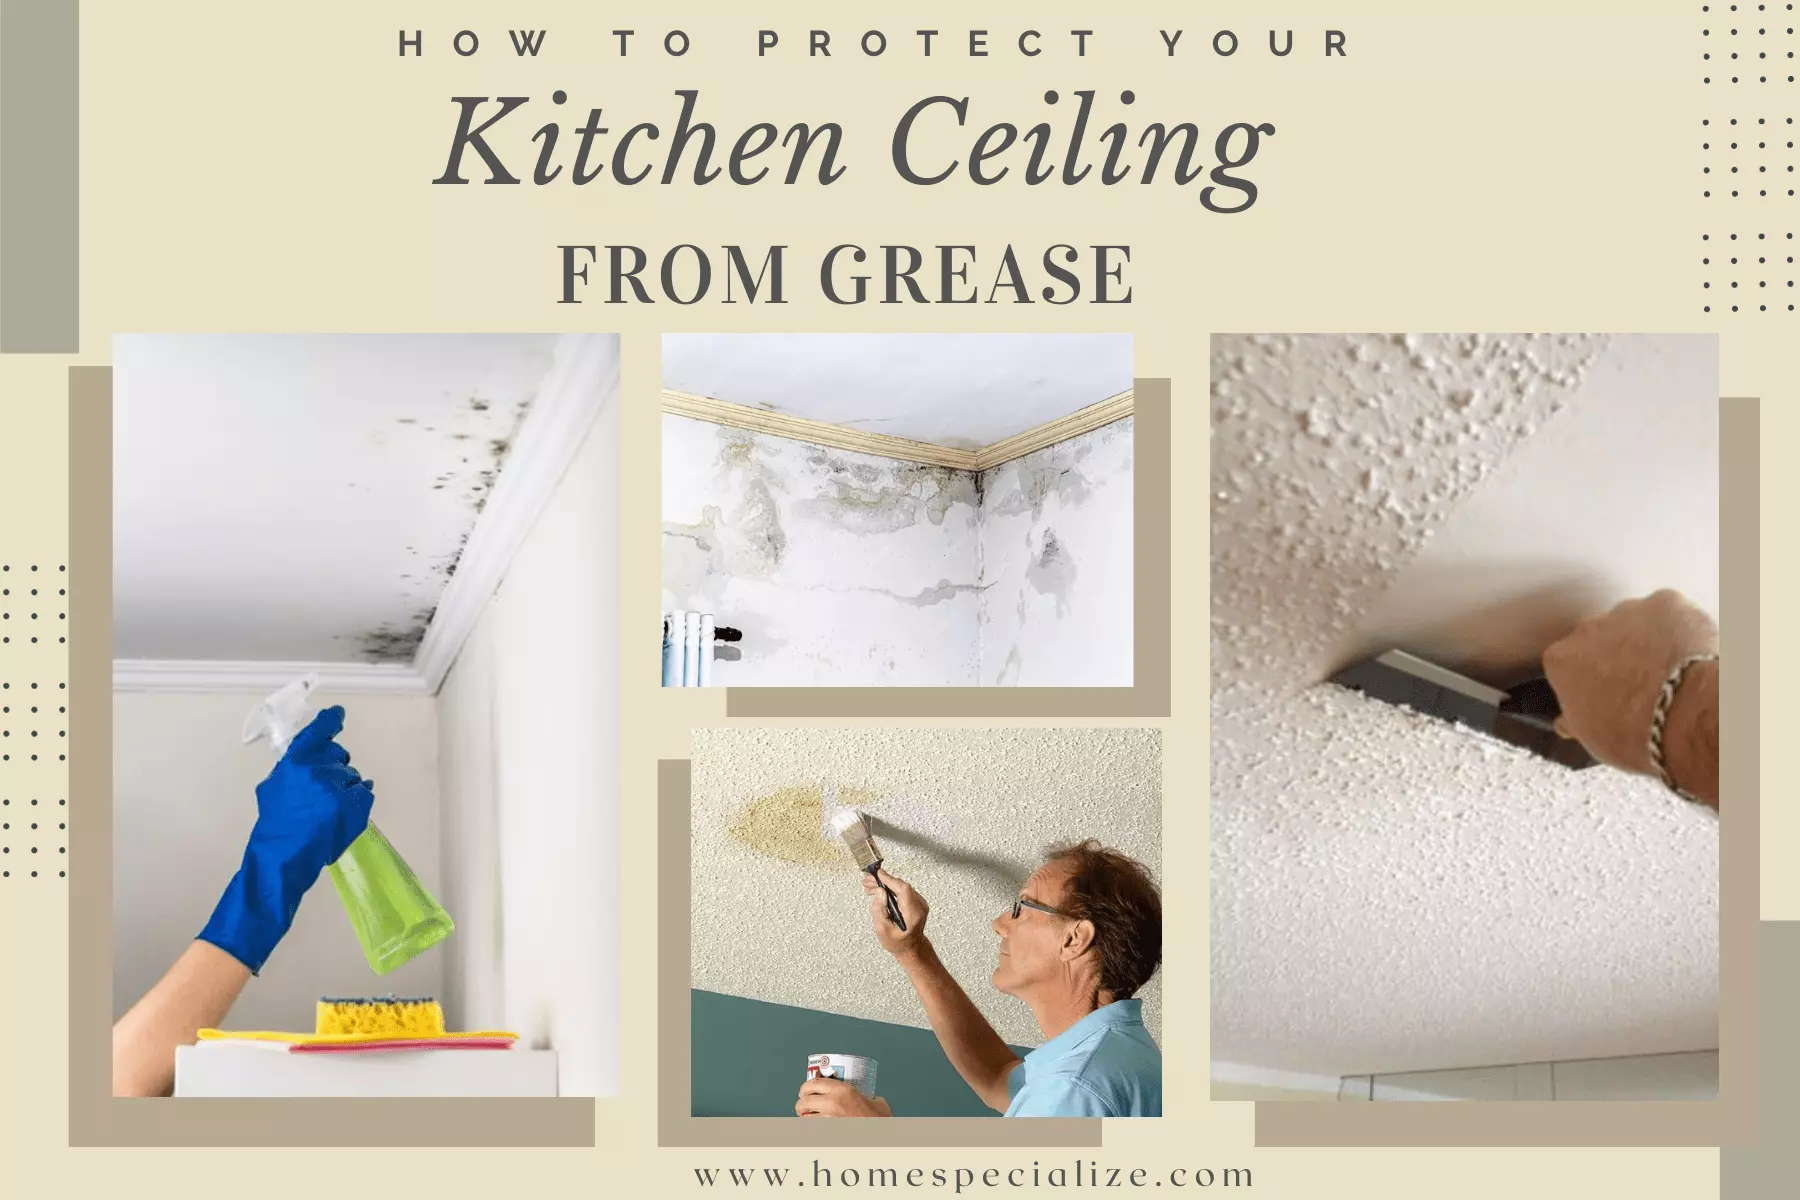 How to Protect Your Kitchen Ceiling from Grease